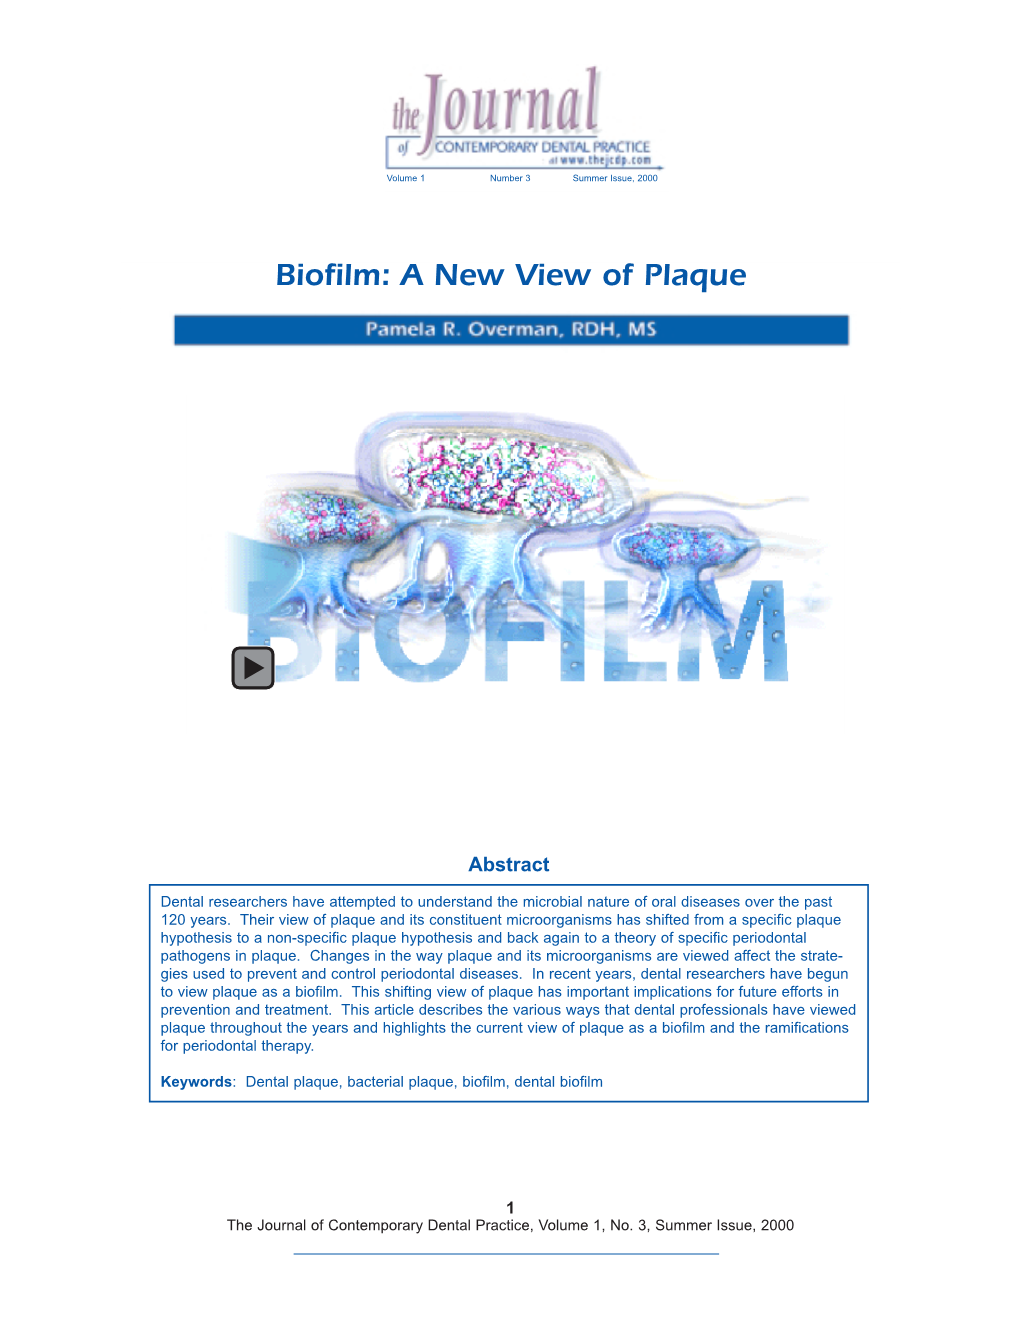 Biofilm: a New View of Plaque